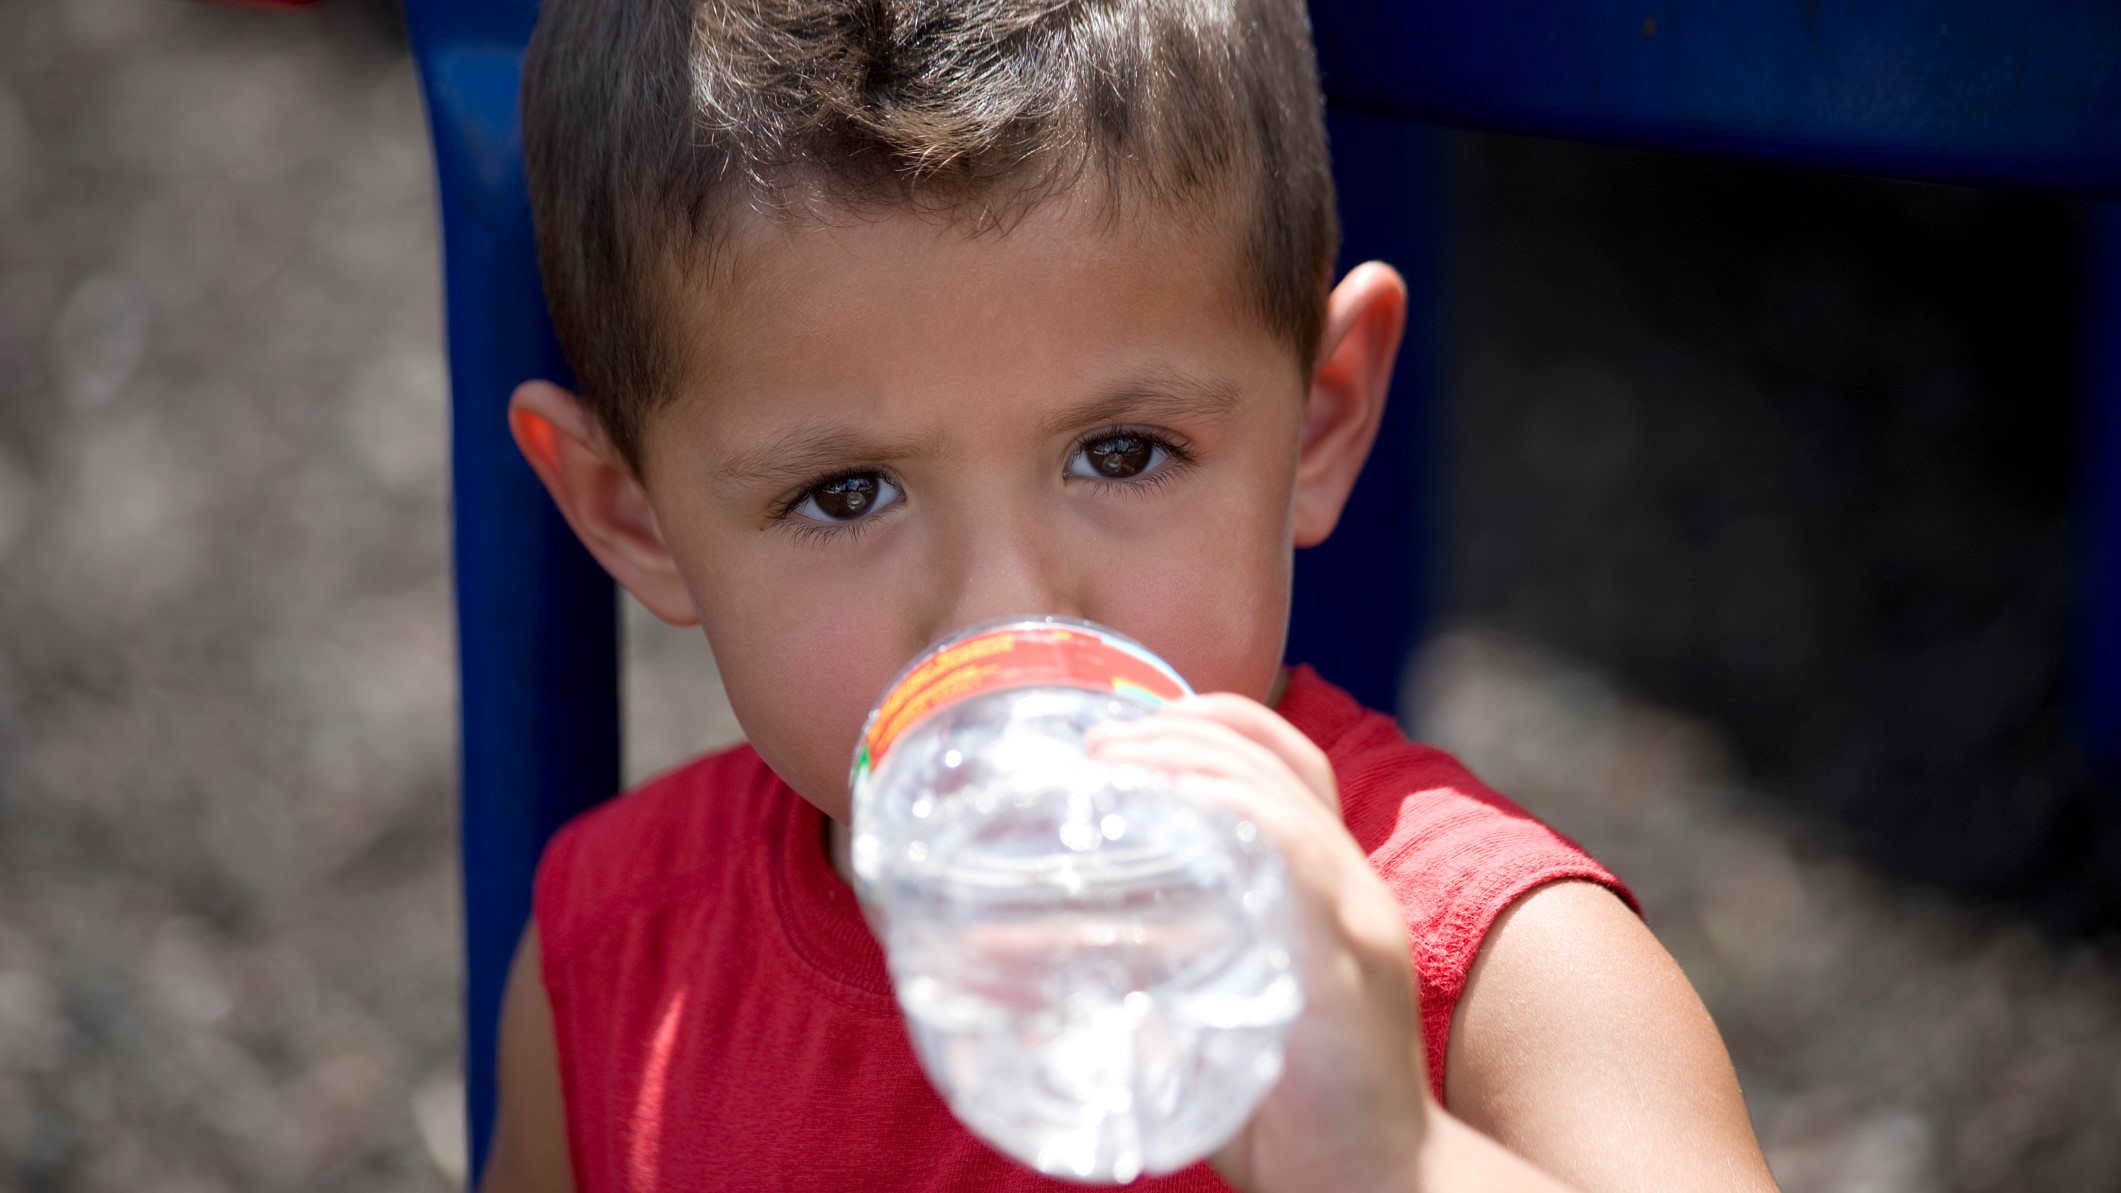 young boy drinking from a bottle of water